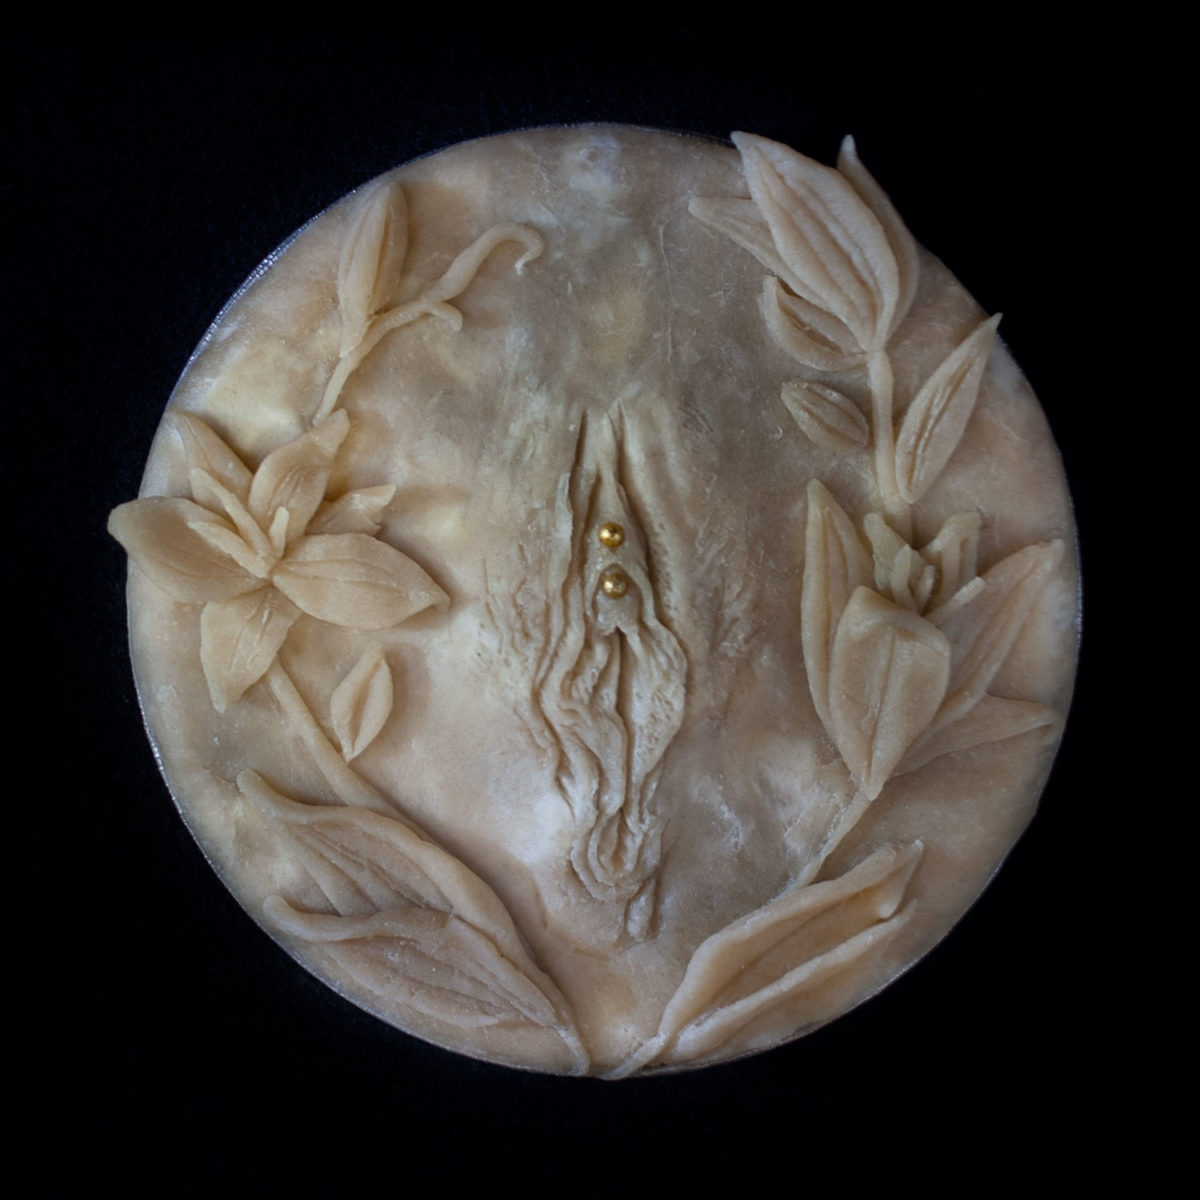 Hand sculpted pie crust art with pie crust vulva surrounded by a wreath of pie crust lilies on a black background. The clitoral hood appears pierced with gold dragees